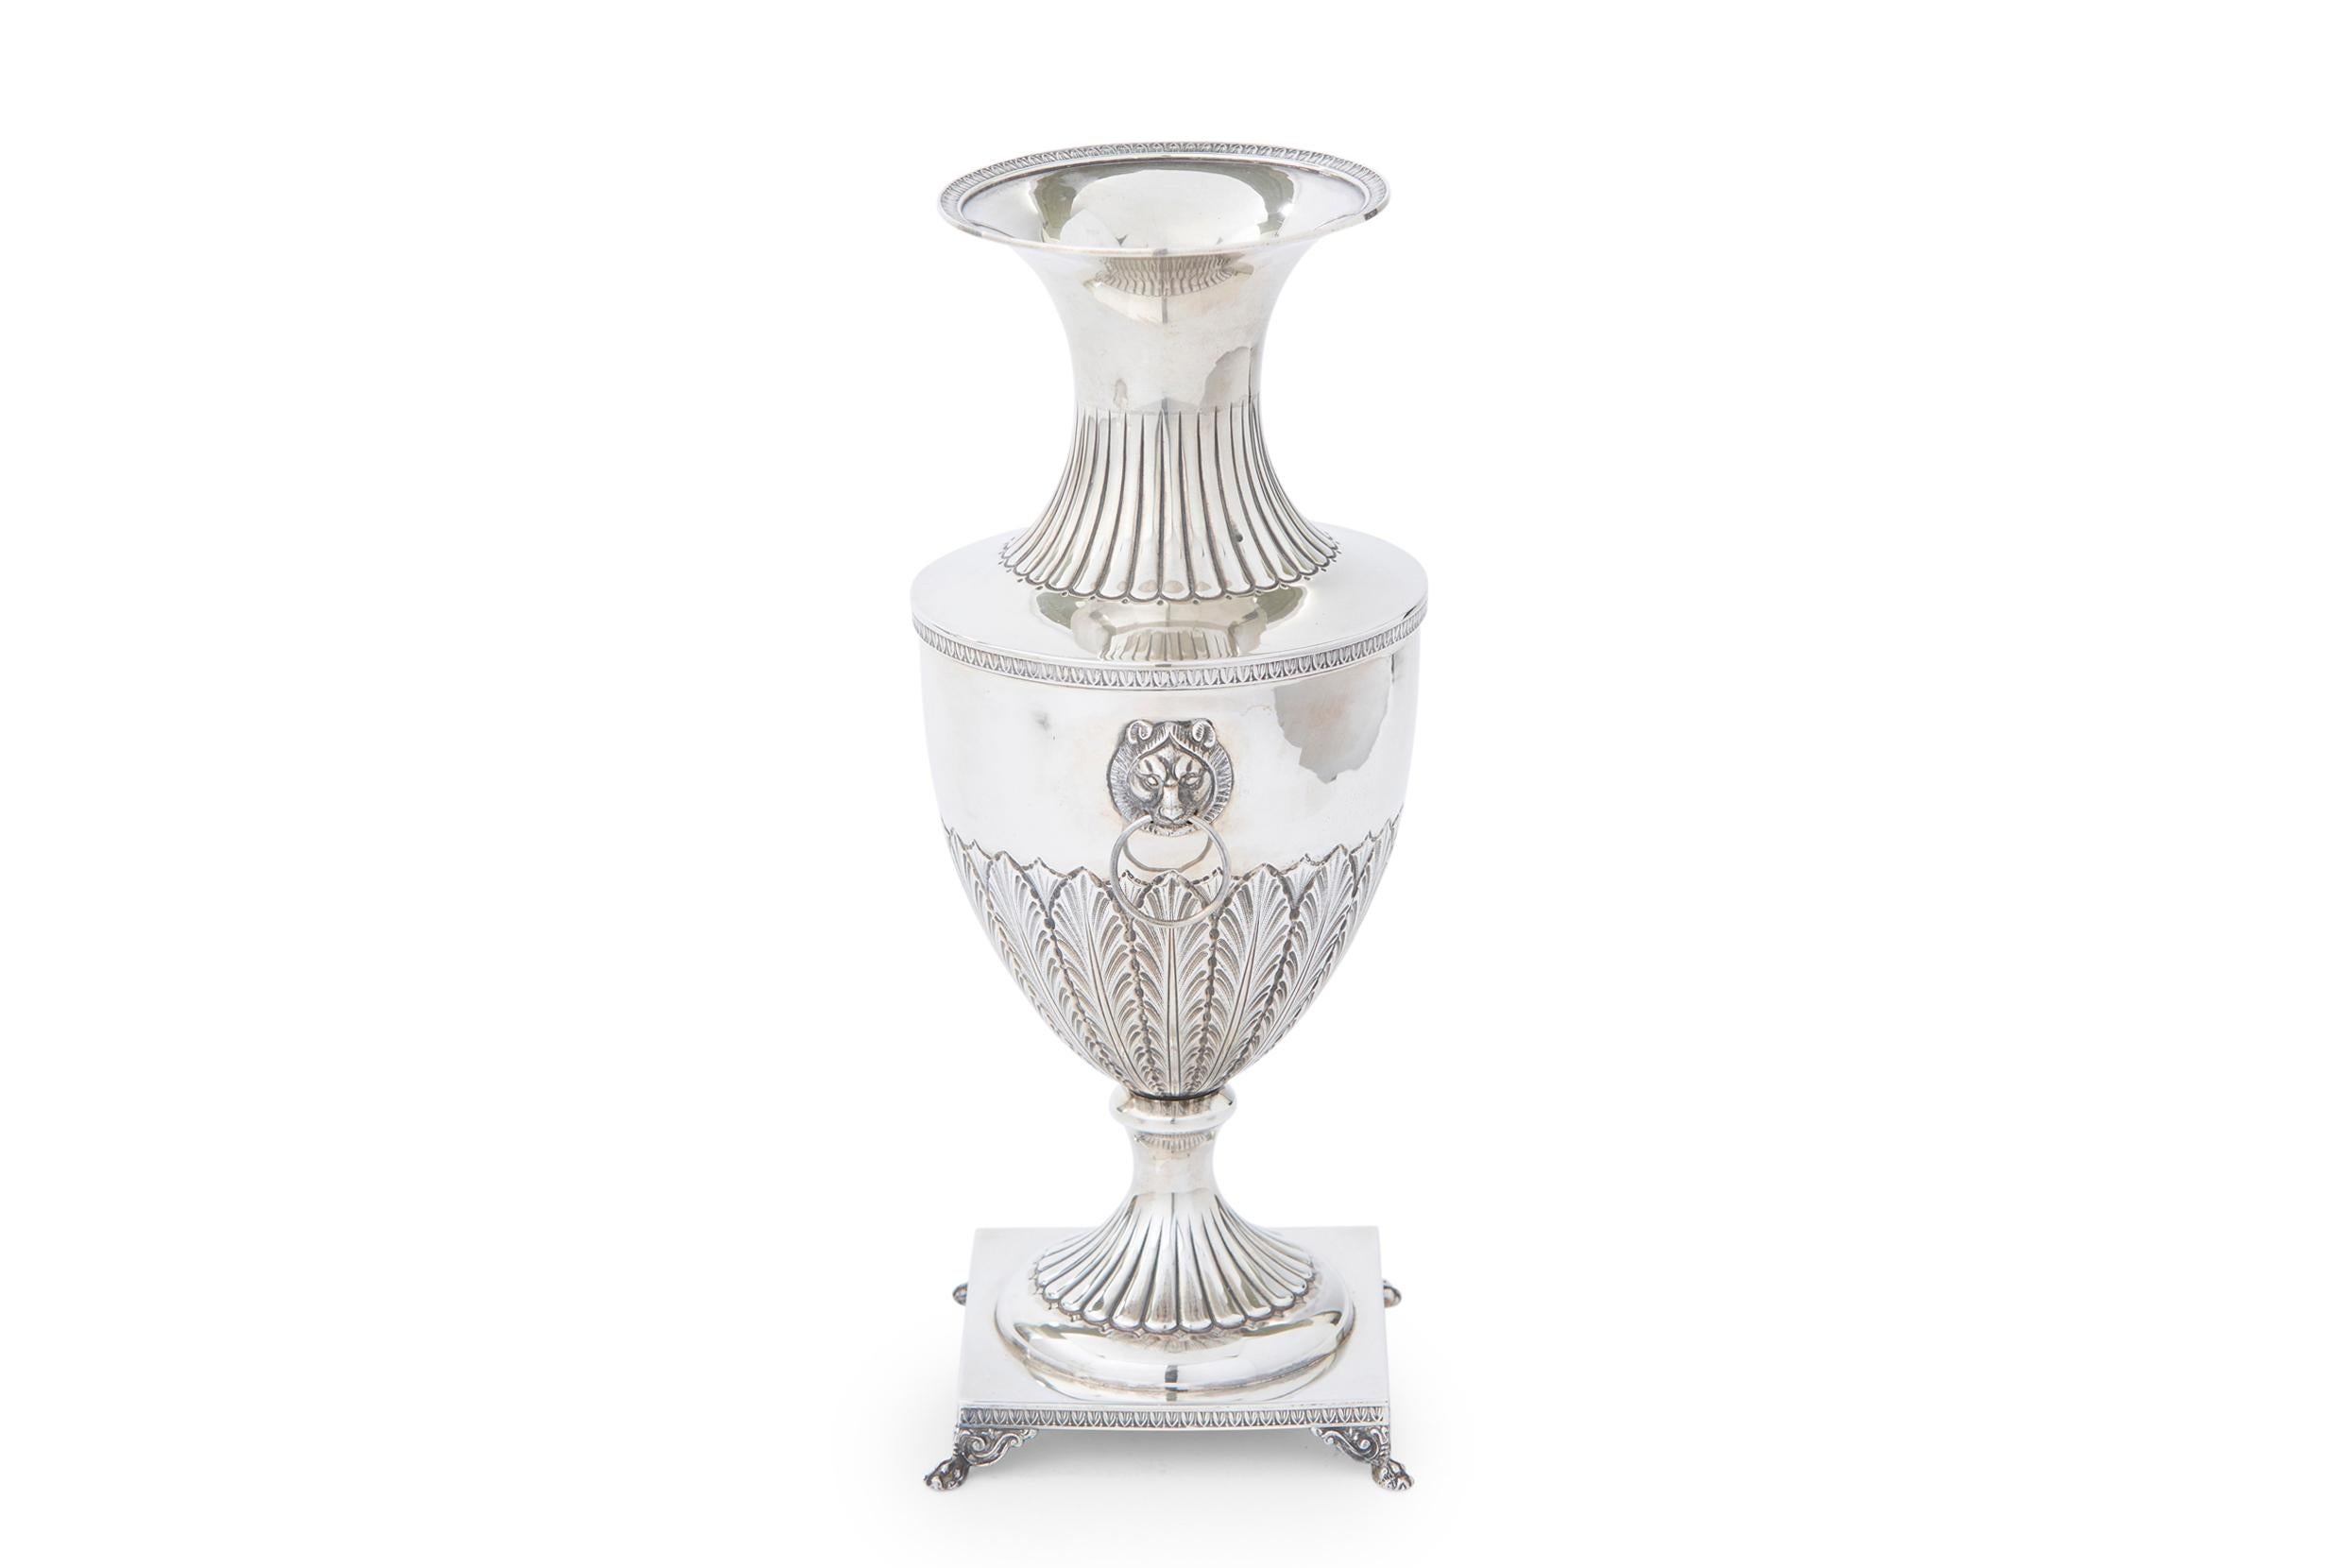 Sterling silver footed decorative vase / piece with Lion heads side handles and exterior design details resting on square footed base. The sterling piece is in great antique condition. Minor wear consistent with age / use. Maker's mark undersigned.